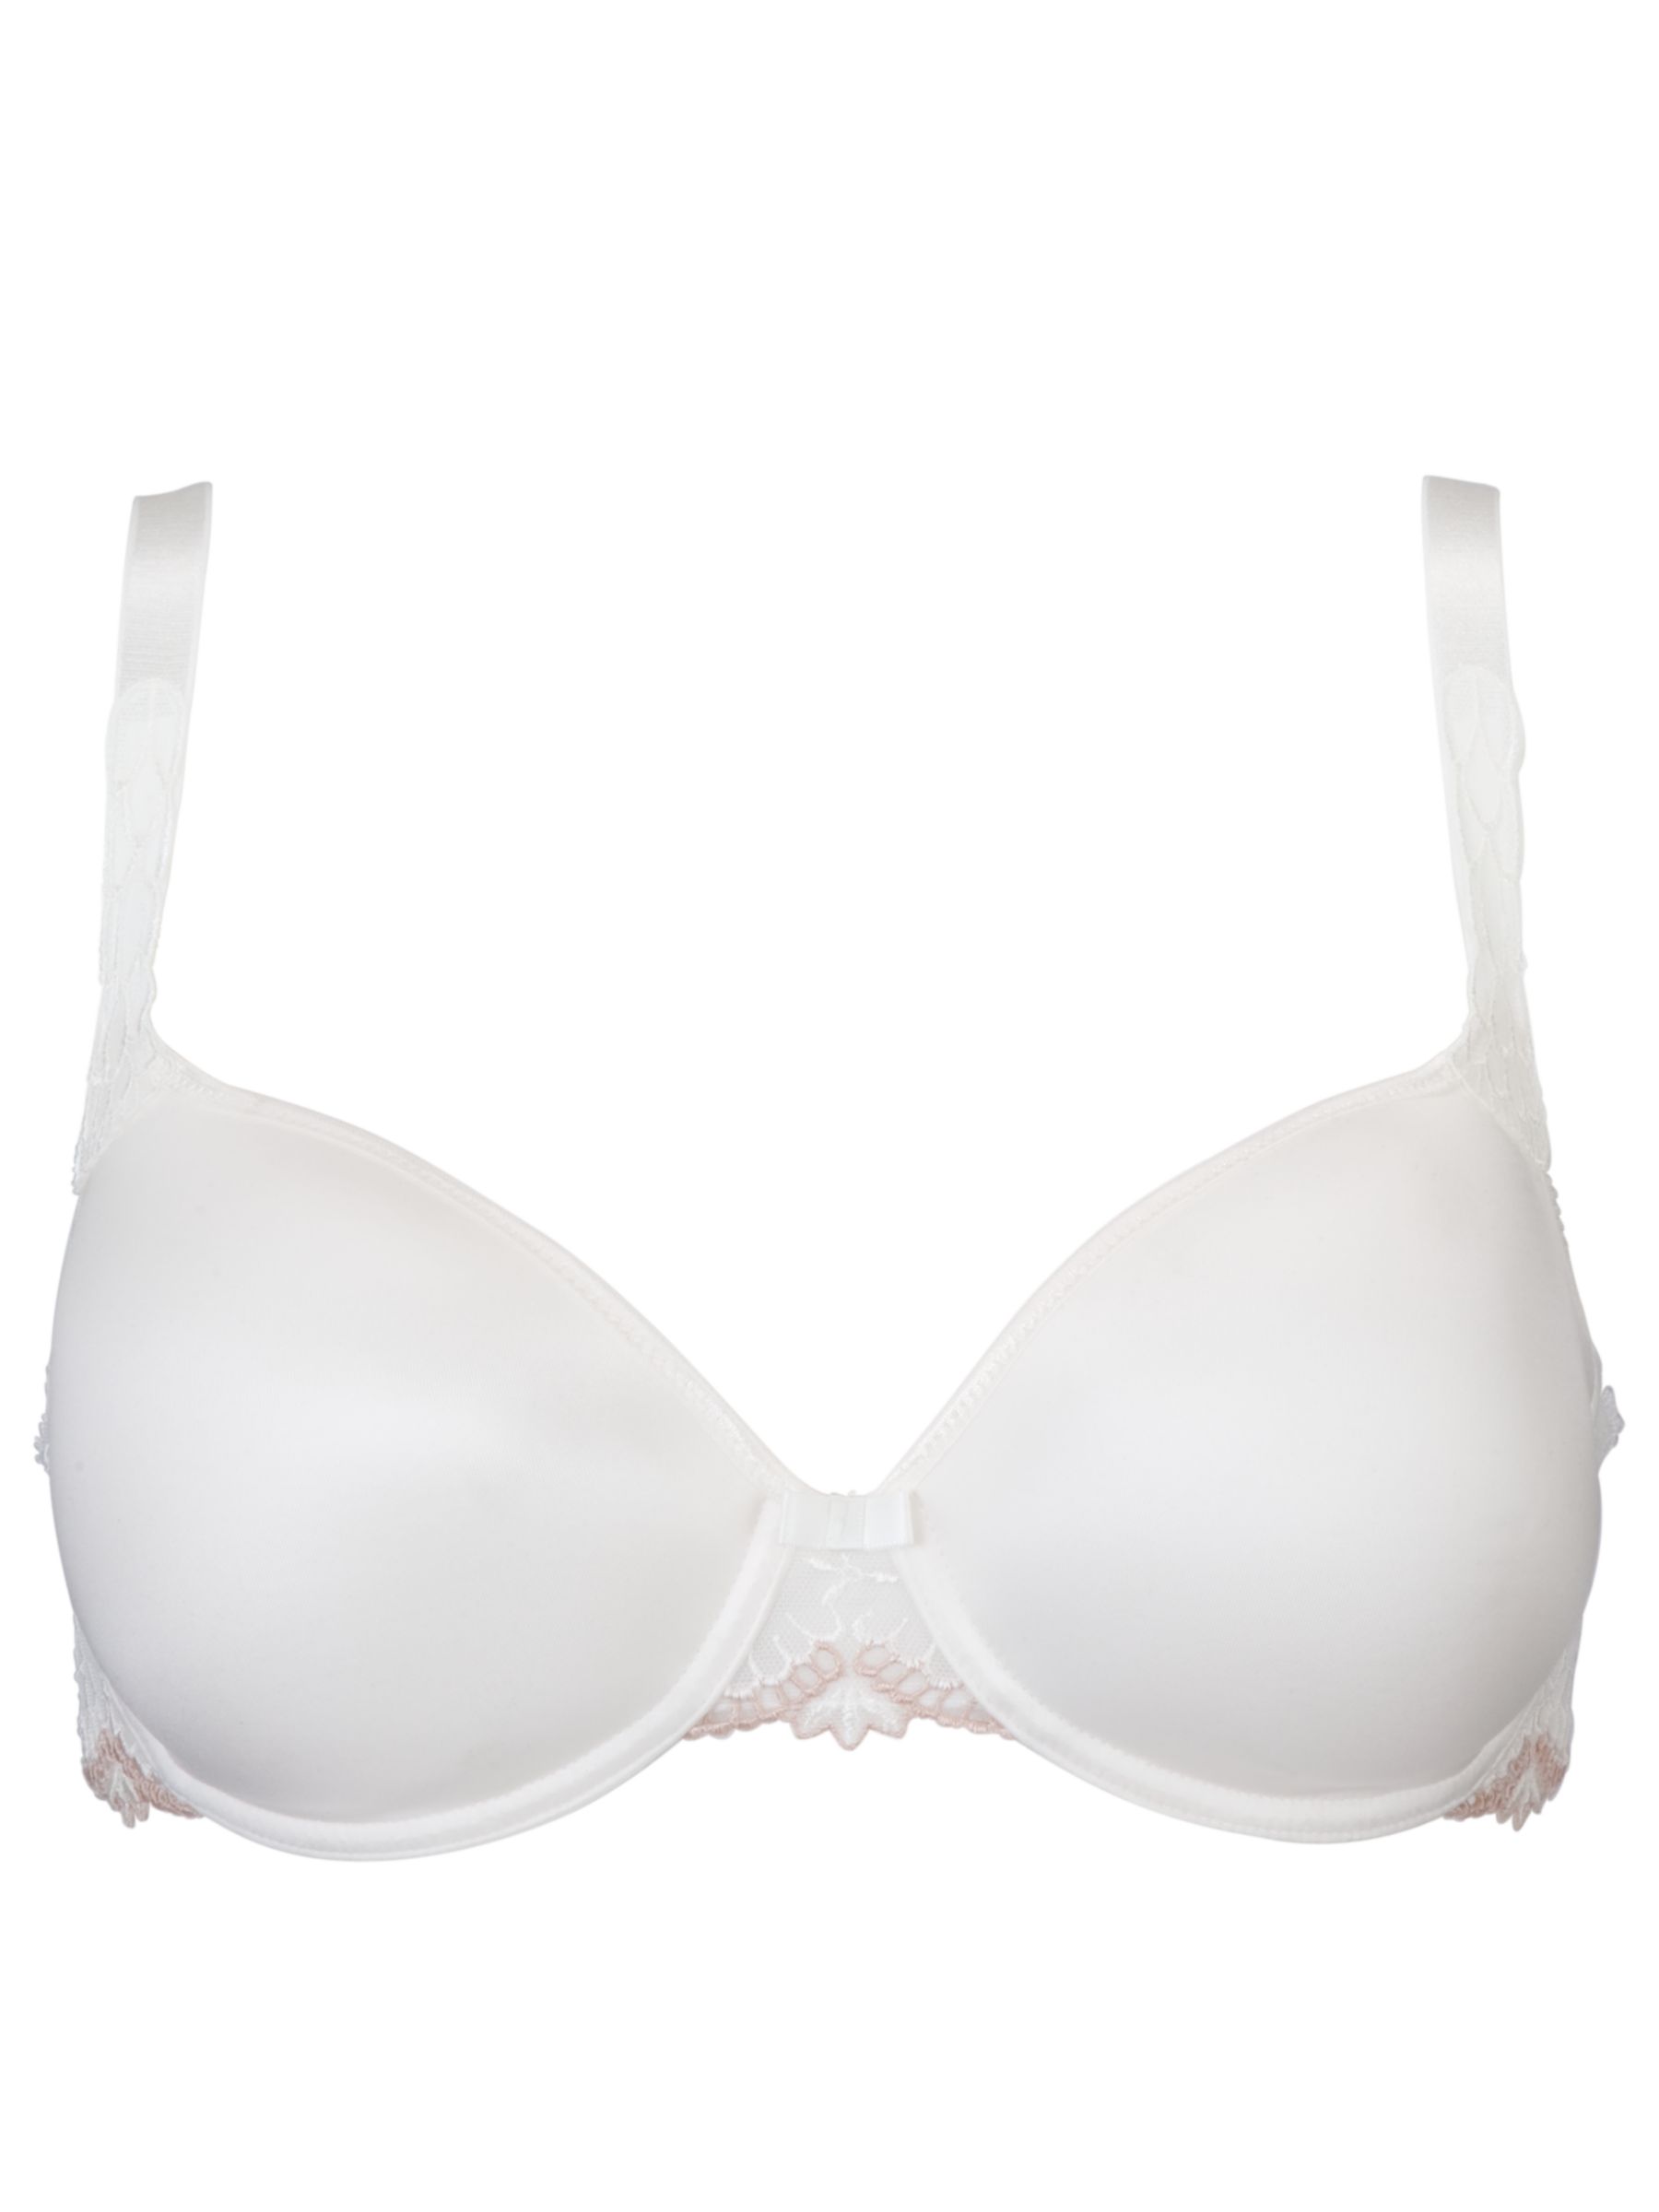 Chantelle Icone T-Shirt Bra, Milk/Biege - review, compare prices, buy ...